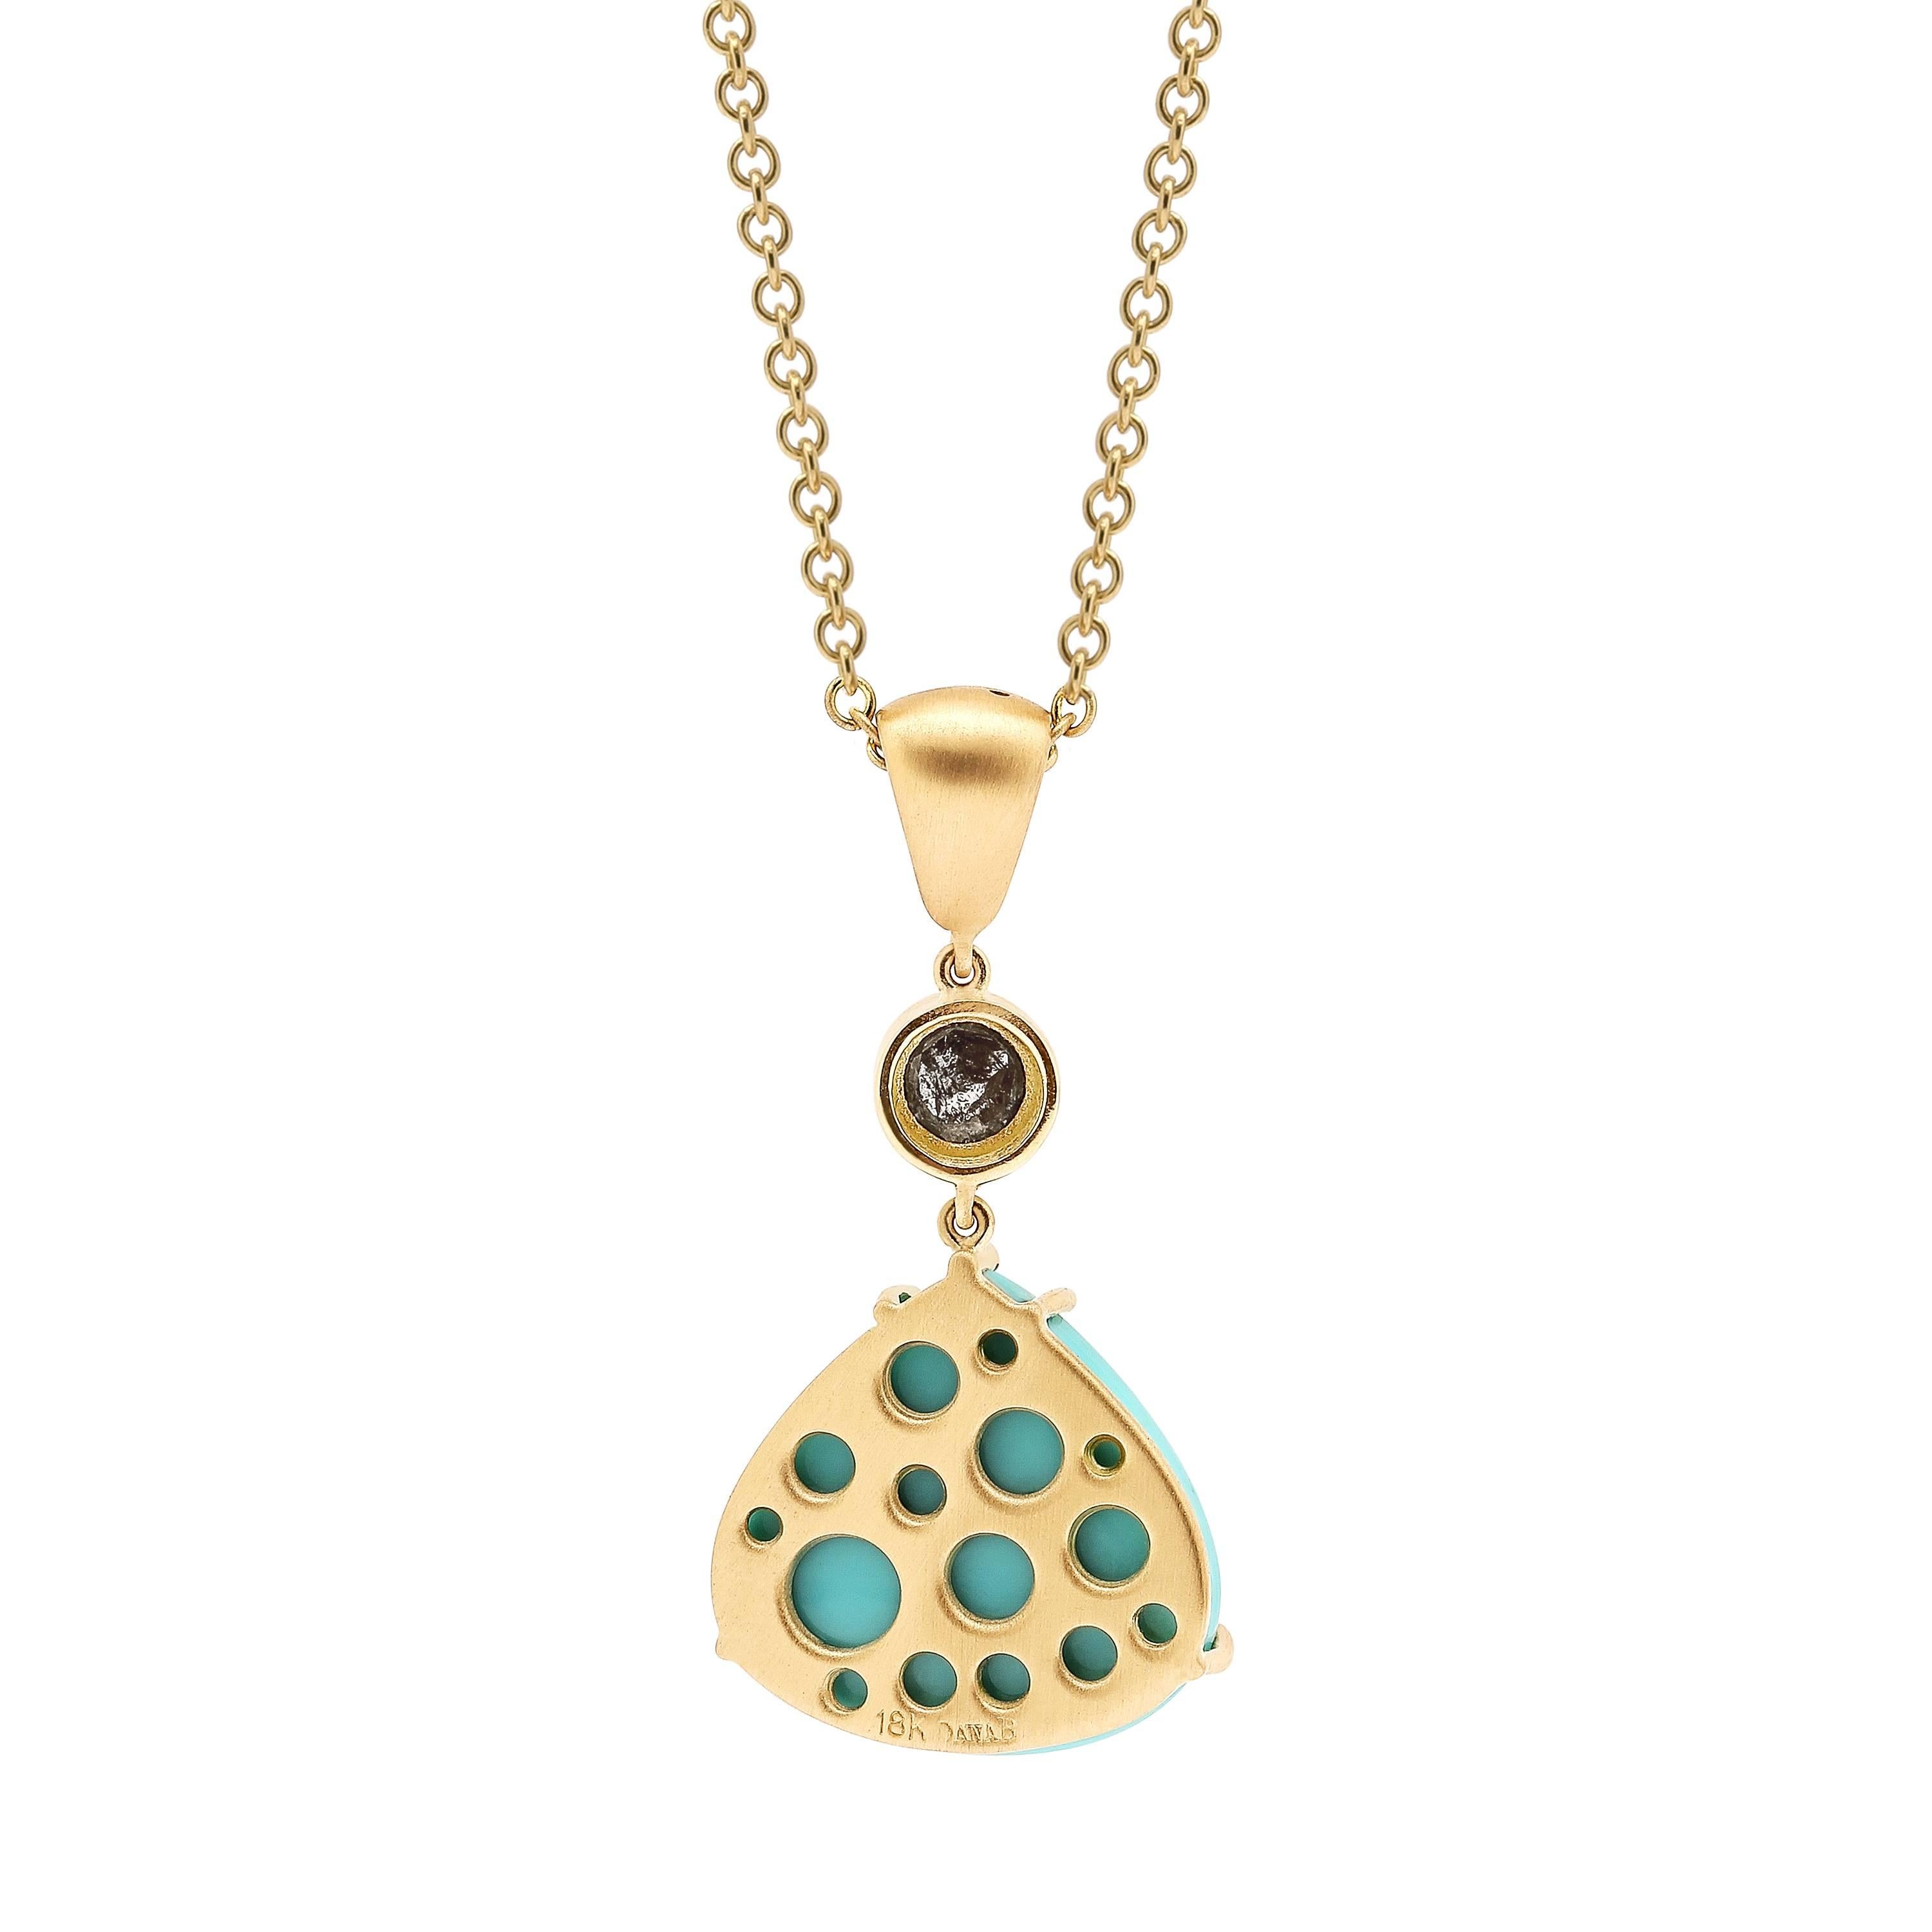 A simple but statement-making drop pendant, with a modern oculus 18 karat yellow gold bale, rose cut natural black diamond with plenty of fire, and soft heart-shaped baby blue sleeping beauty turquoise all move fluidly and compliment each other